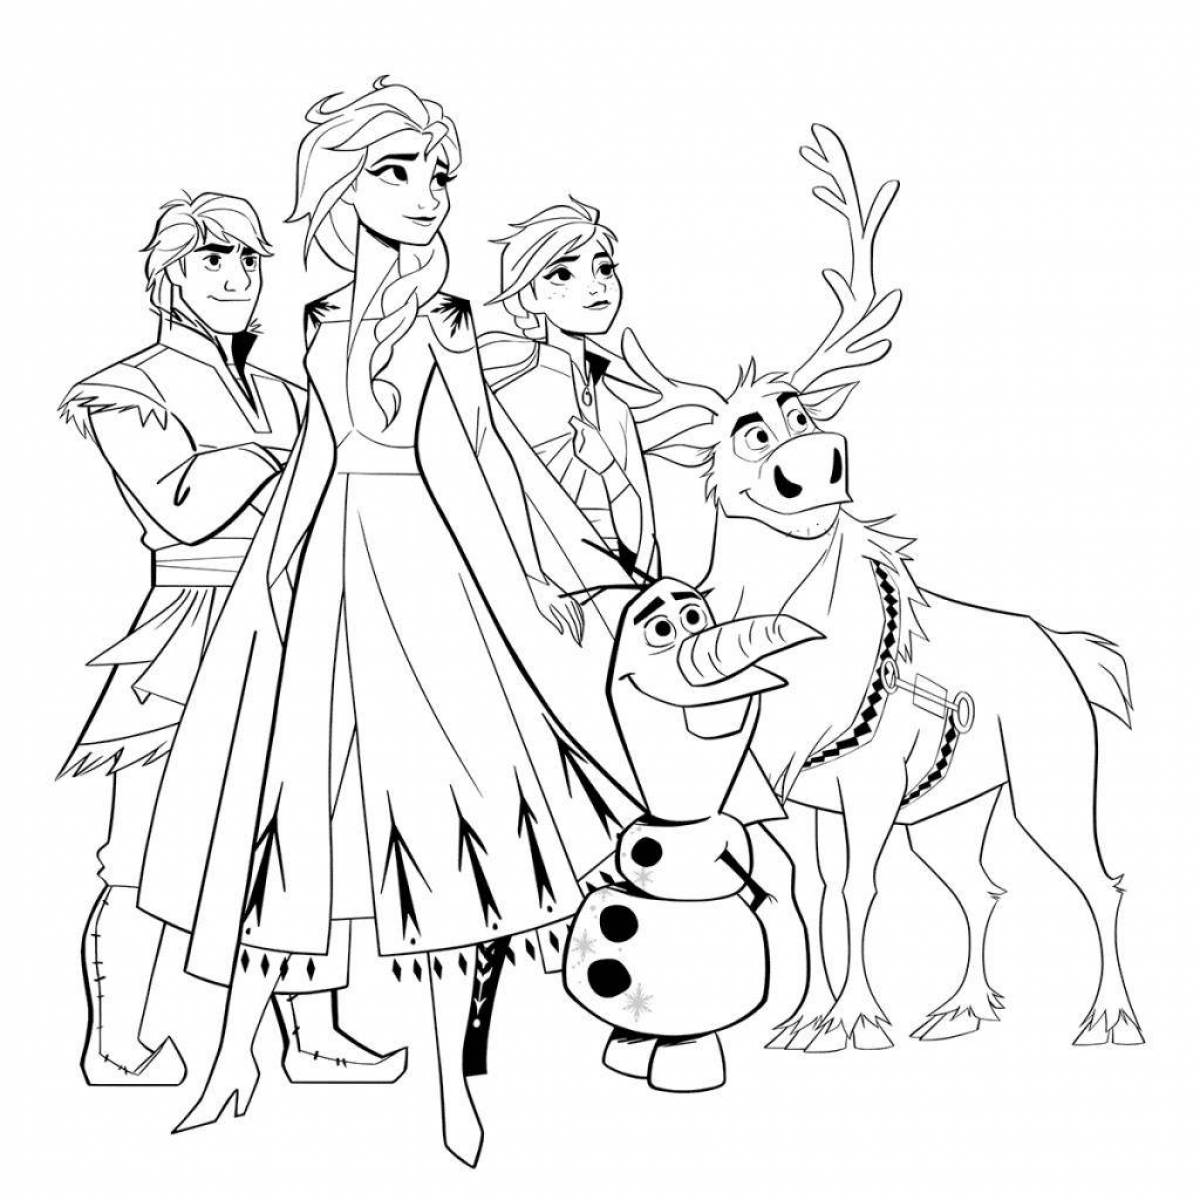 Elsa glowing coloring book for girls